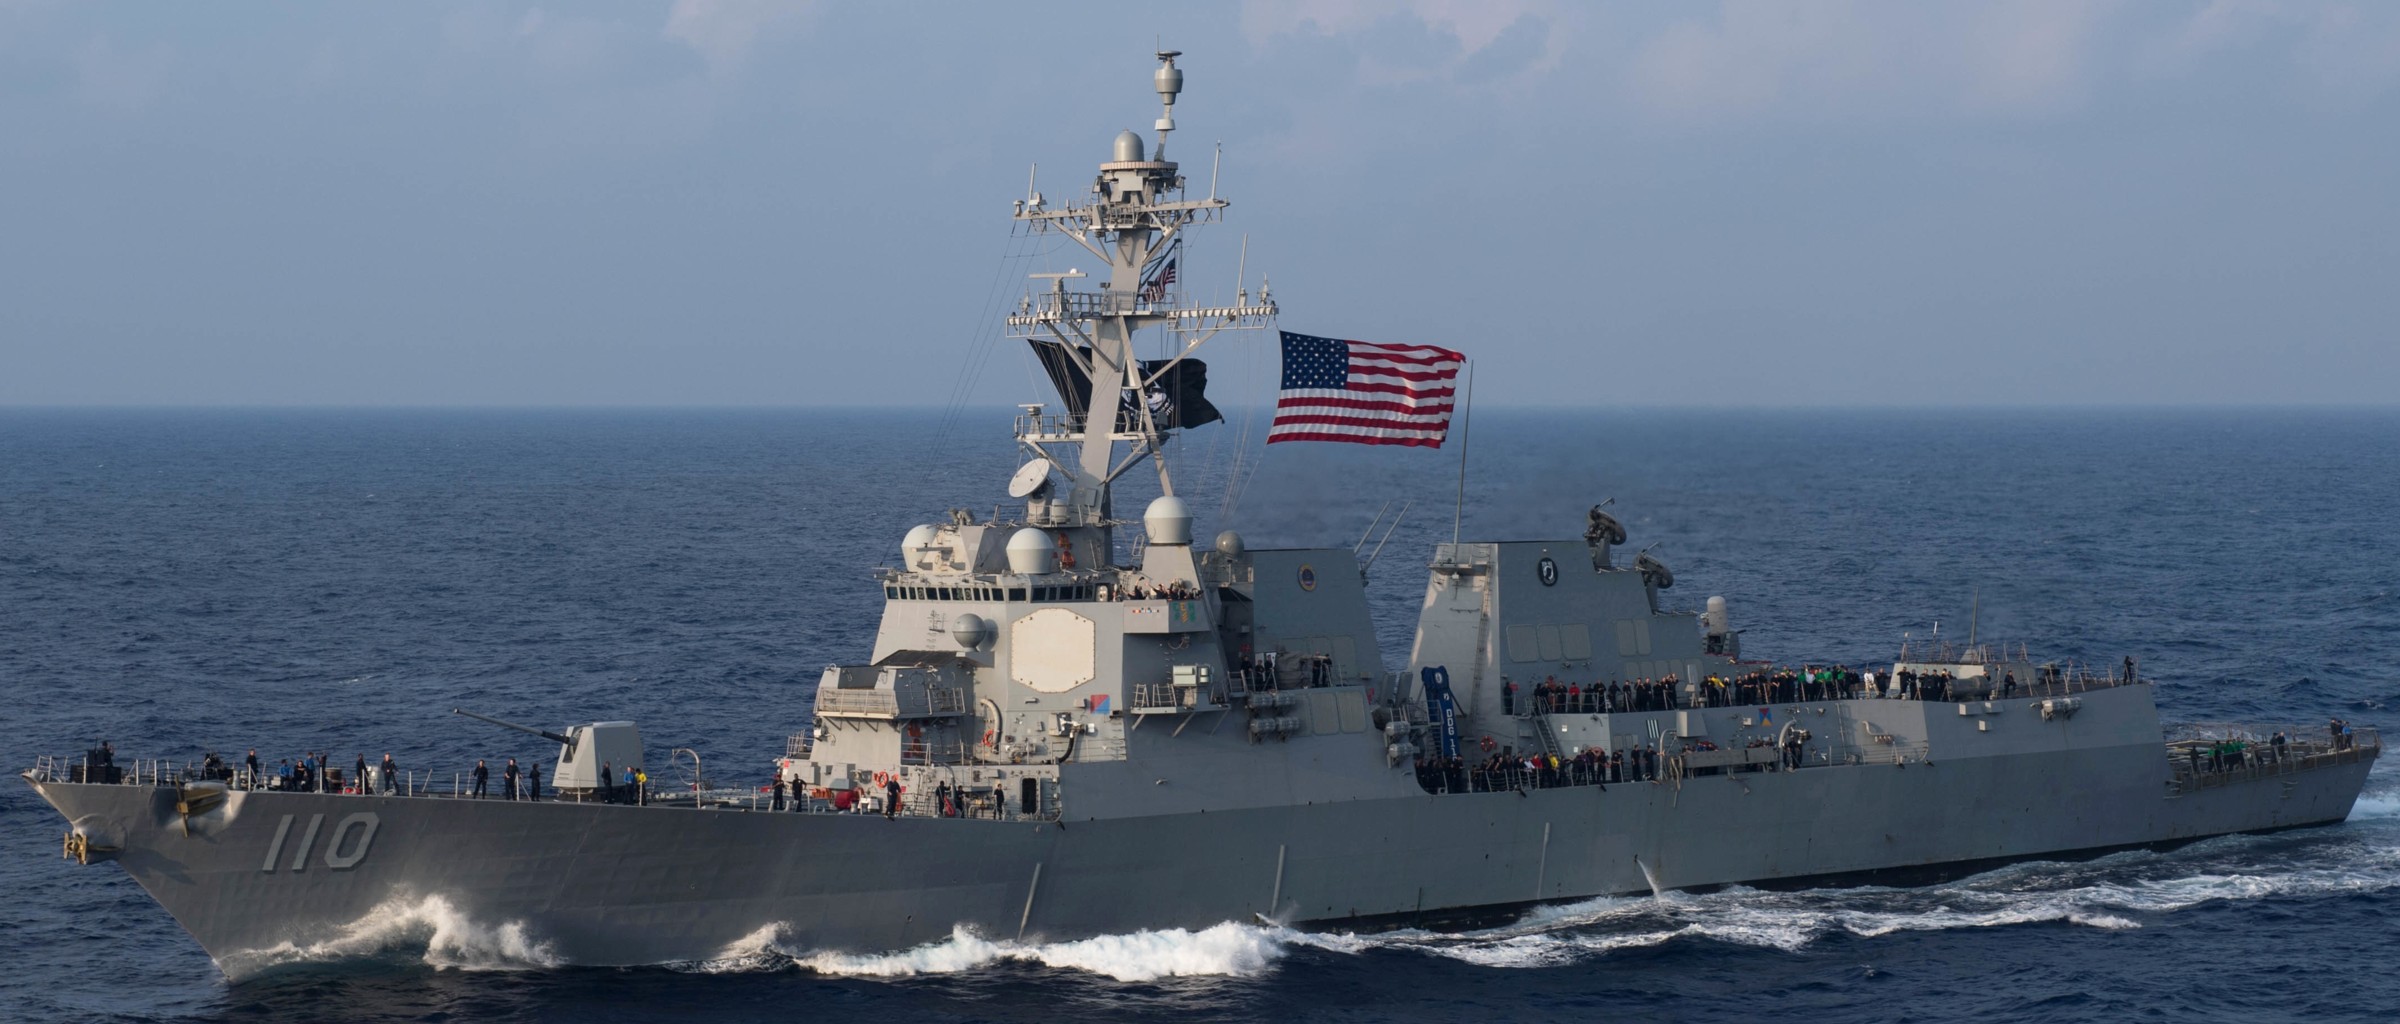 ddg-110 uss william p. lawrence arleigh burke class guided missile destroyer aegis us navy 40